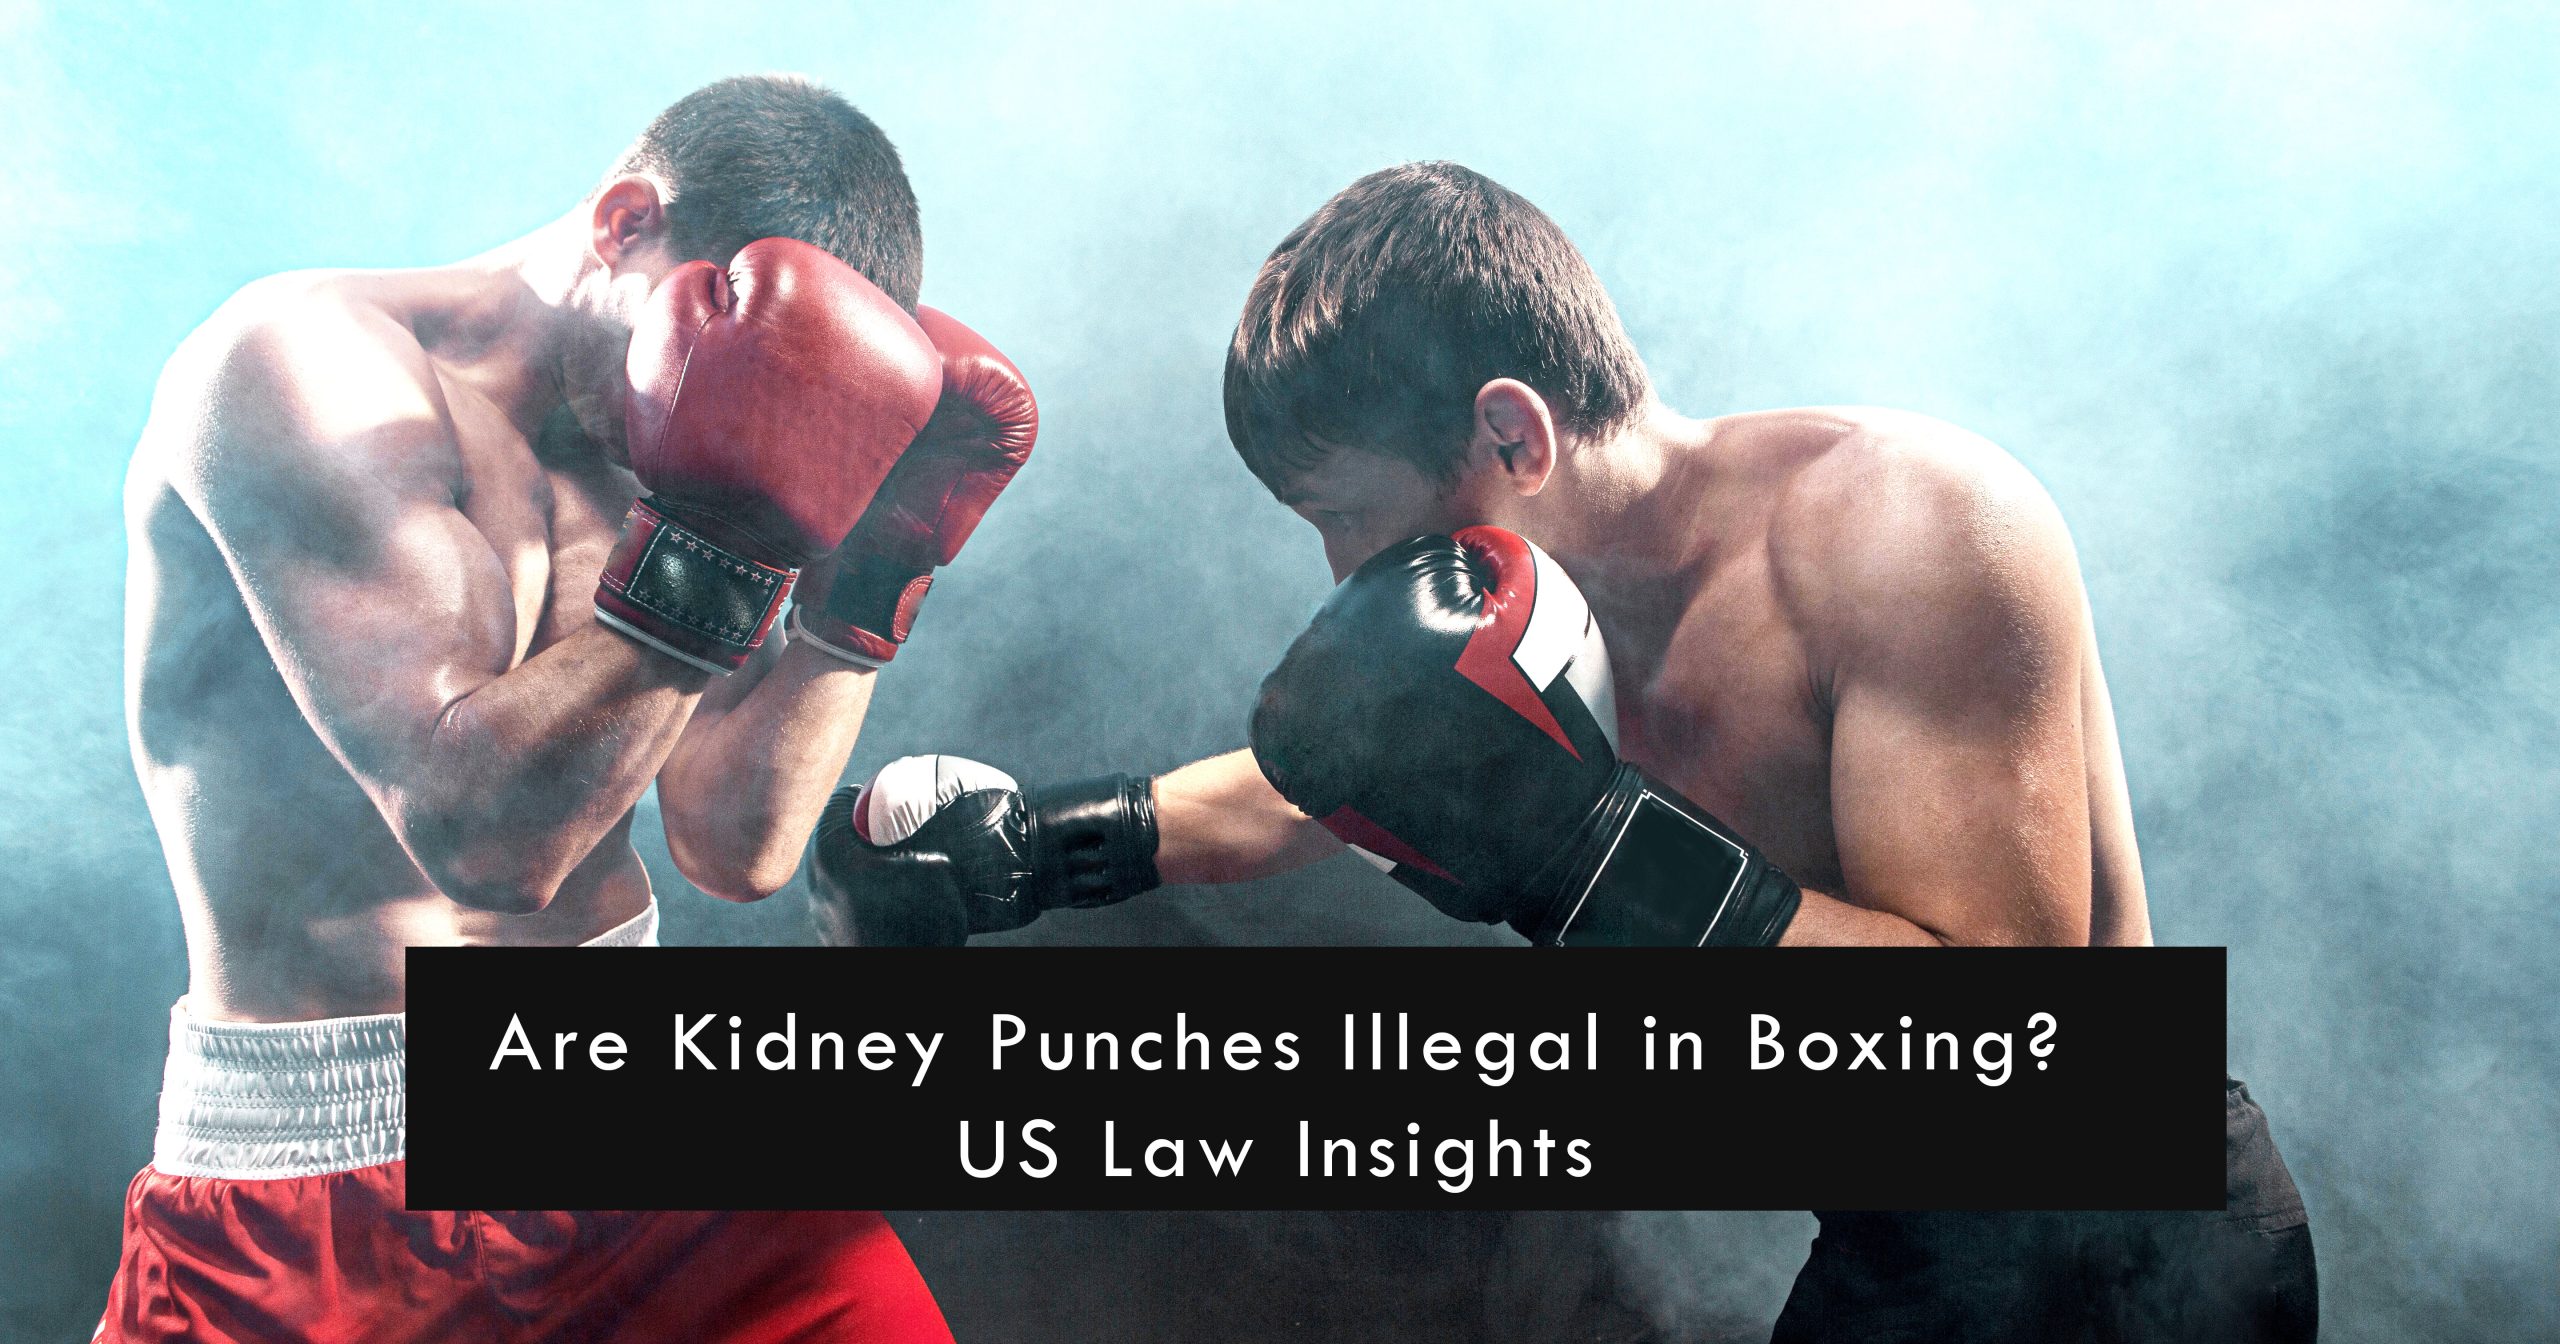 Are Kidney Punches Illegal in Boxing scaled